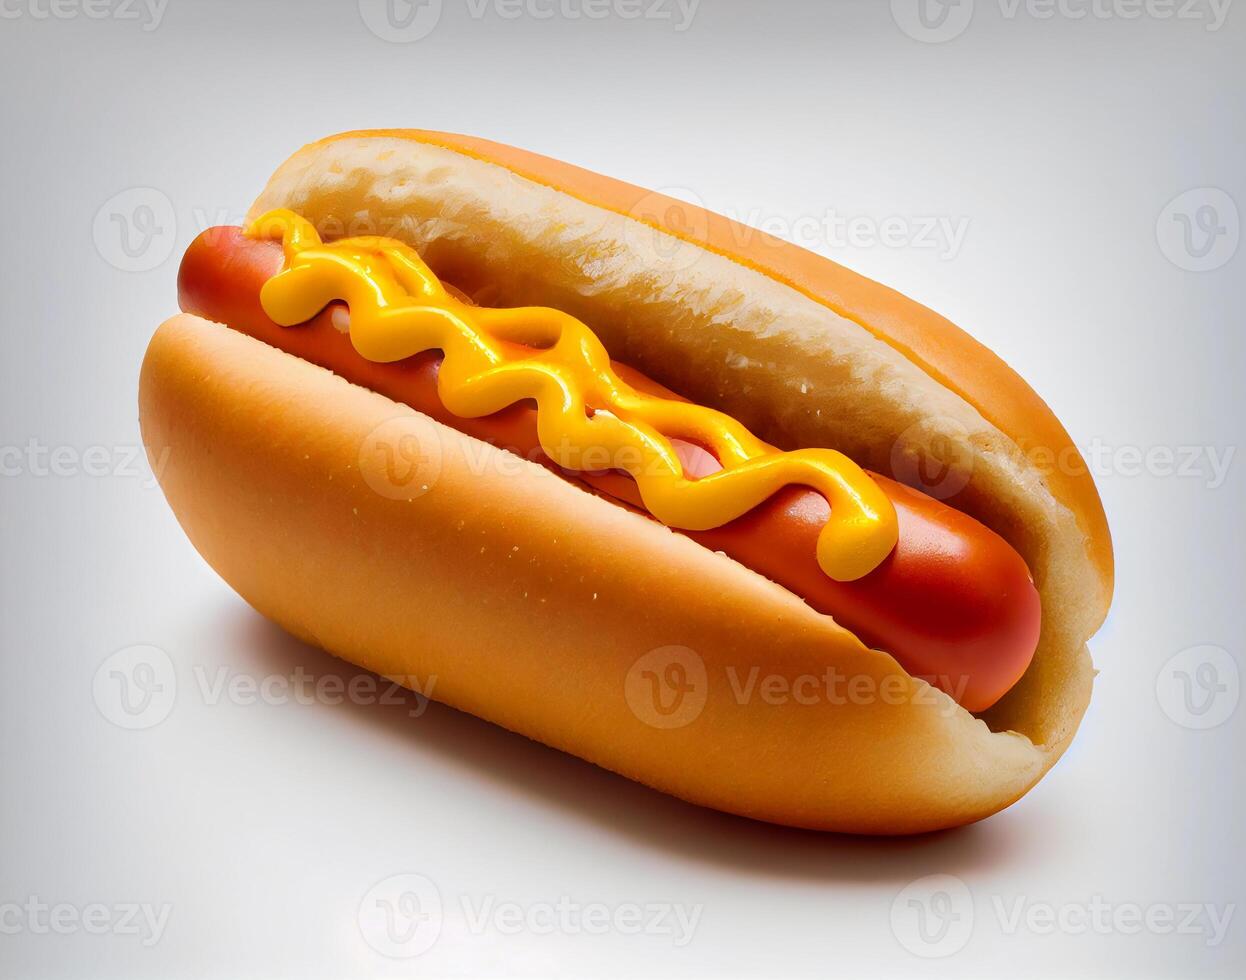 american hot dog with sausage, ketchup and mustard on a white background. photo